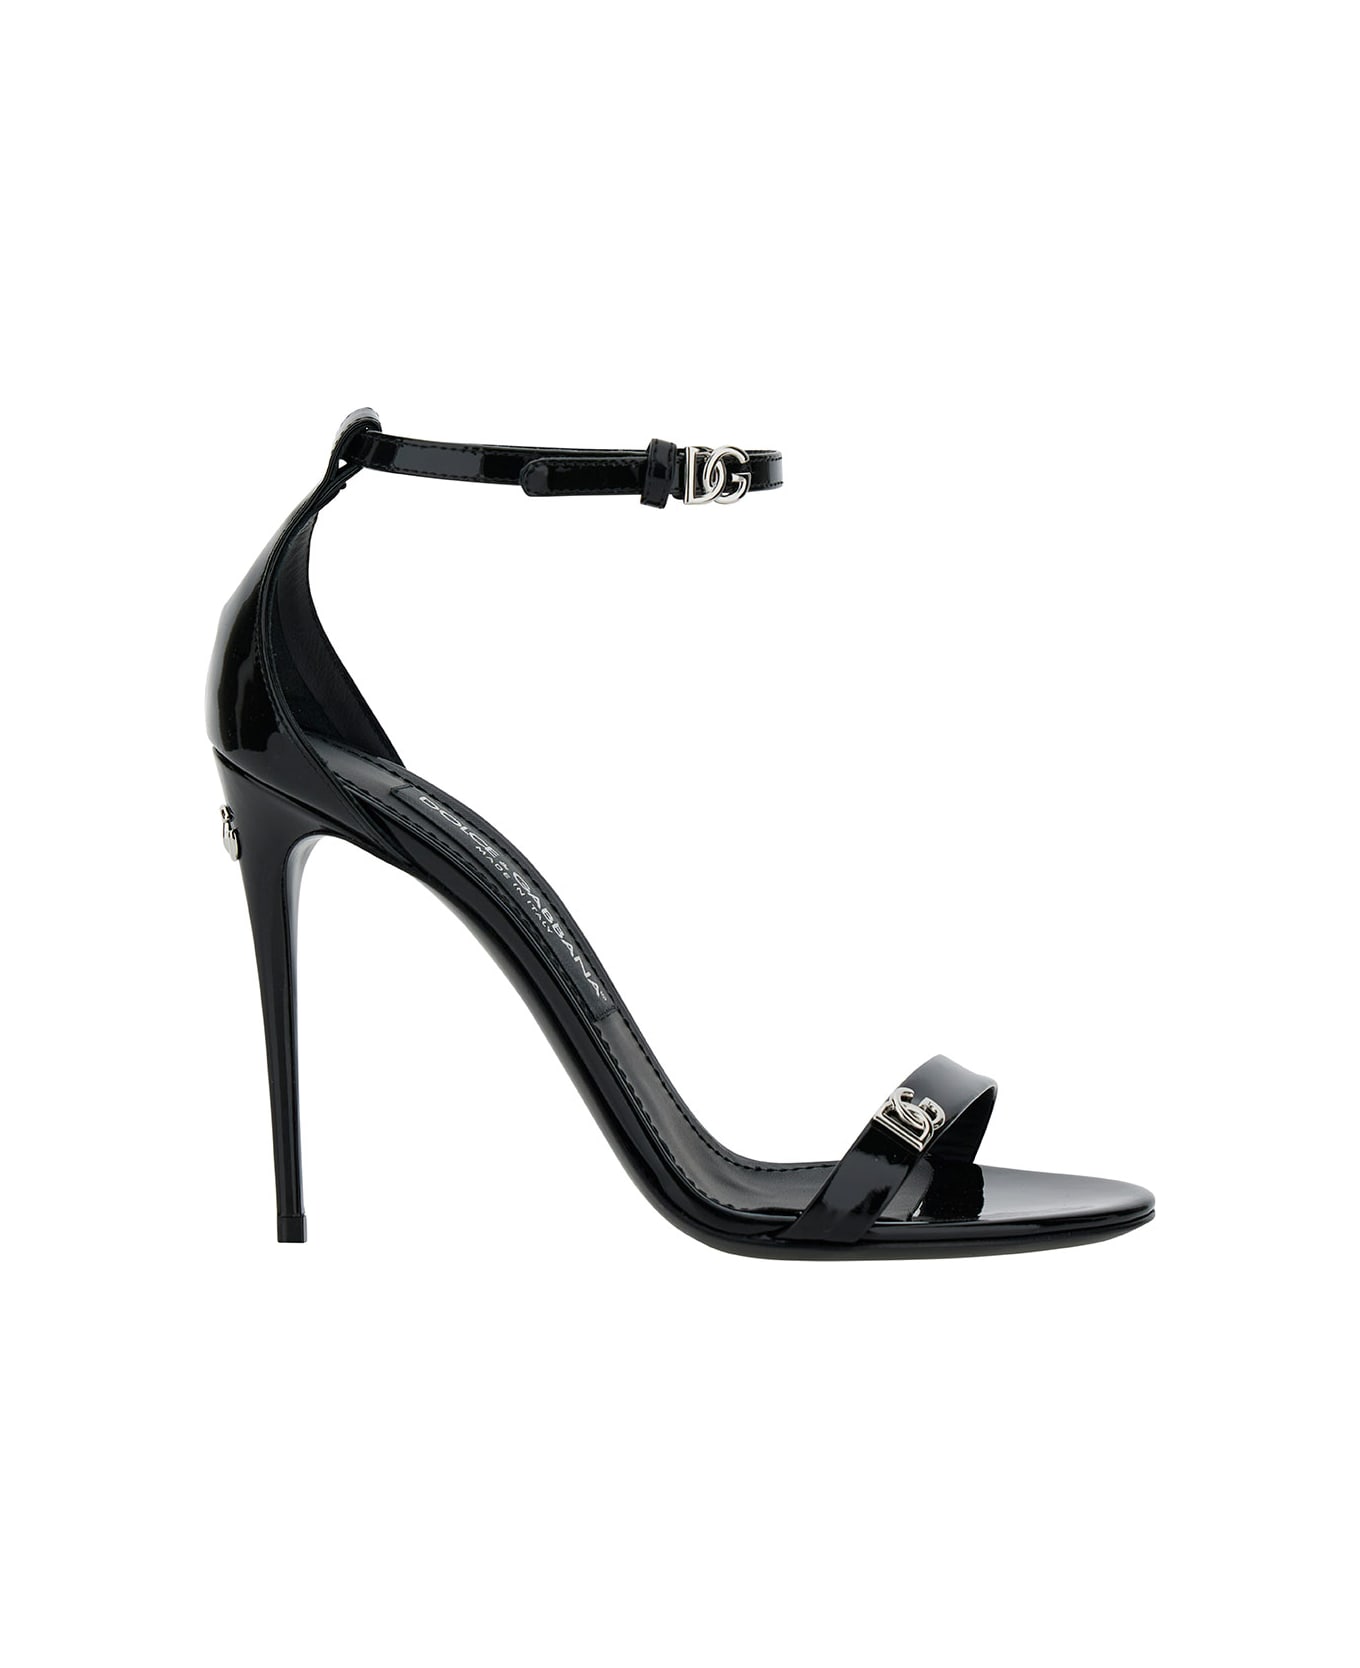 Dolce & Gabbana Sandals With Dg Logo Detail In Patent Leather - Black